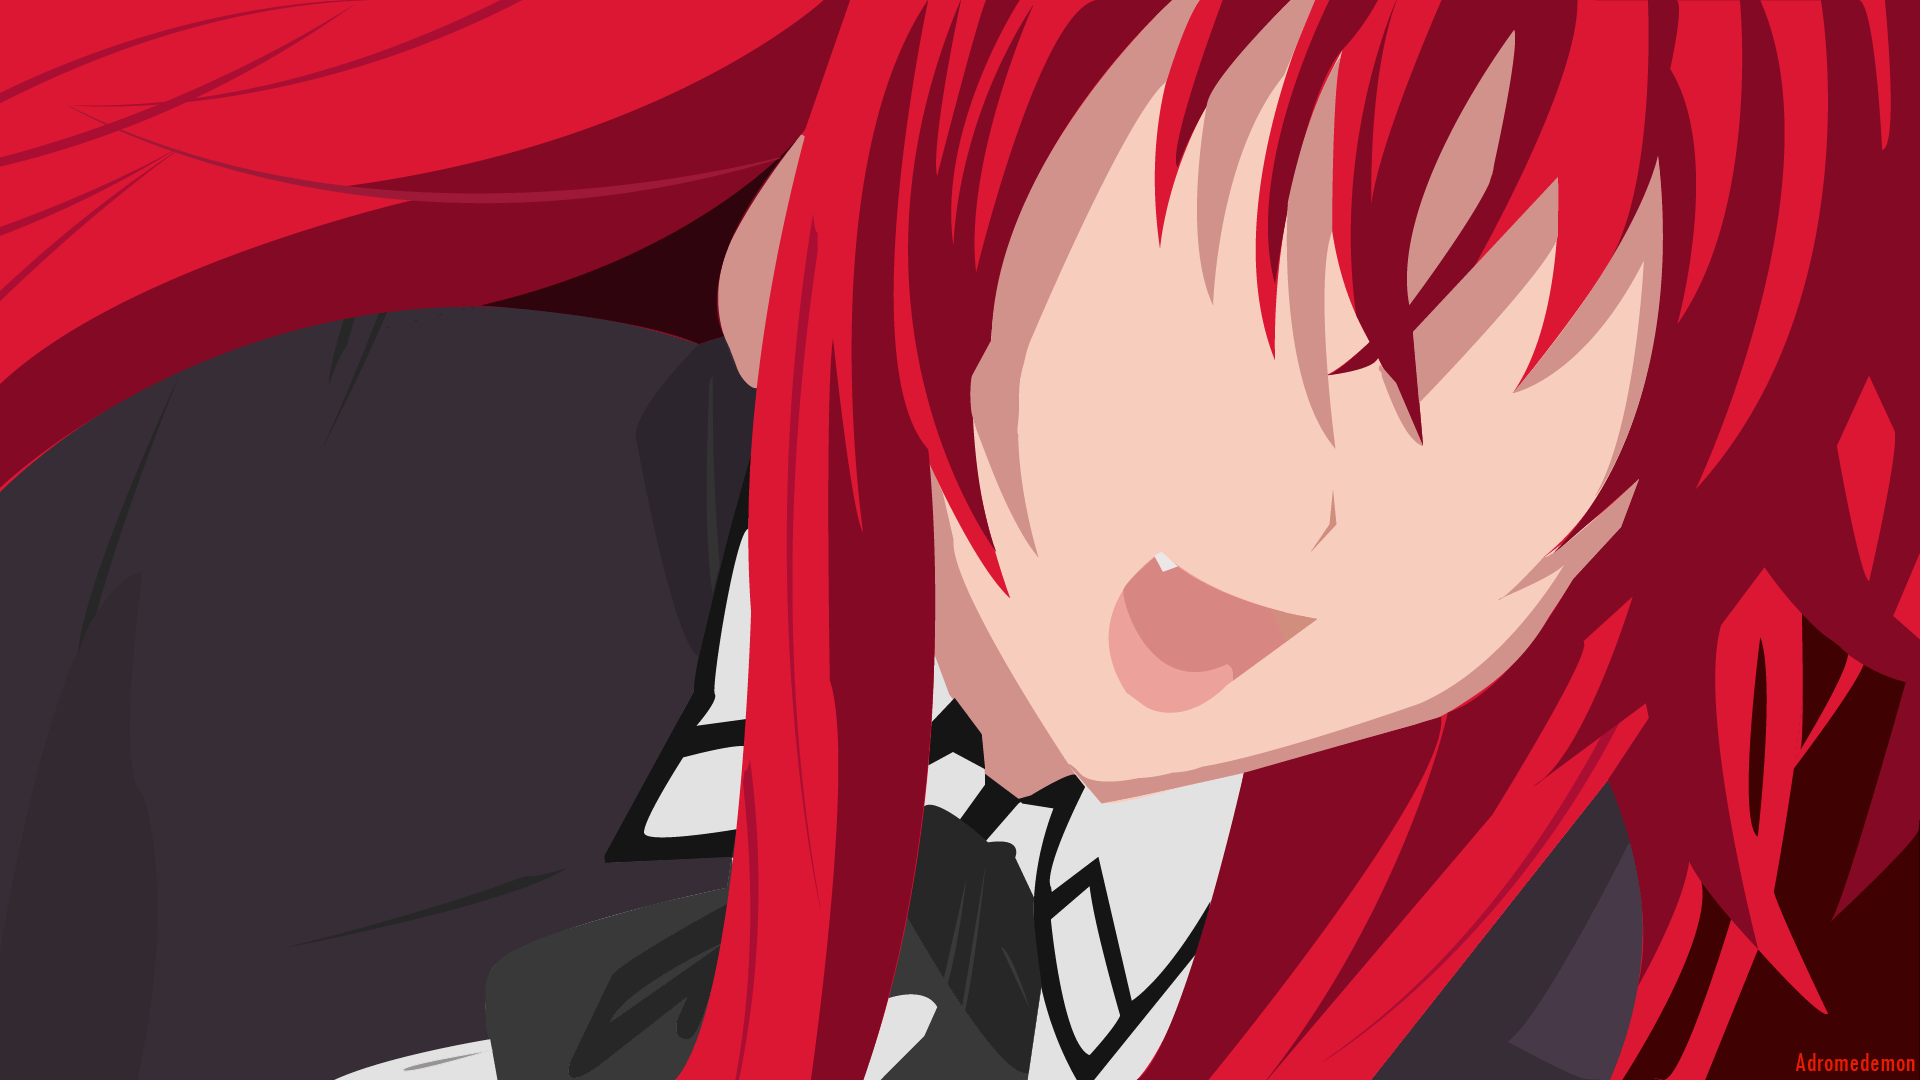 High School DxD Full HD Wallpaper and Background Imagex1080